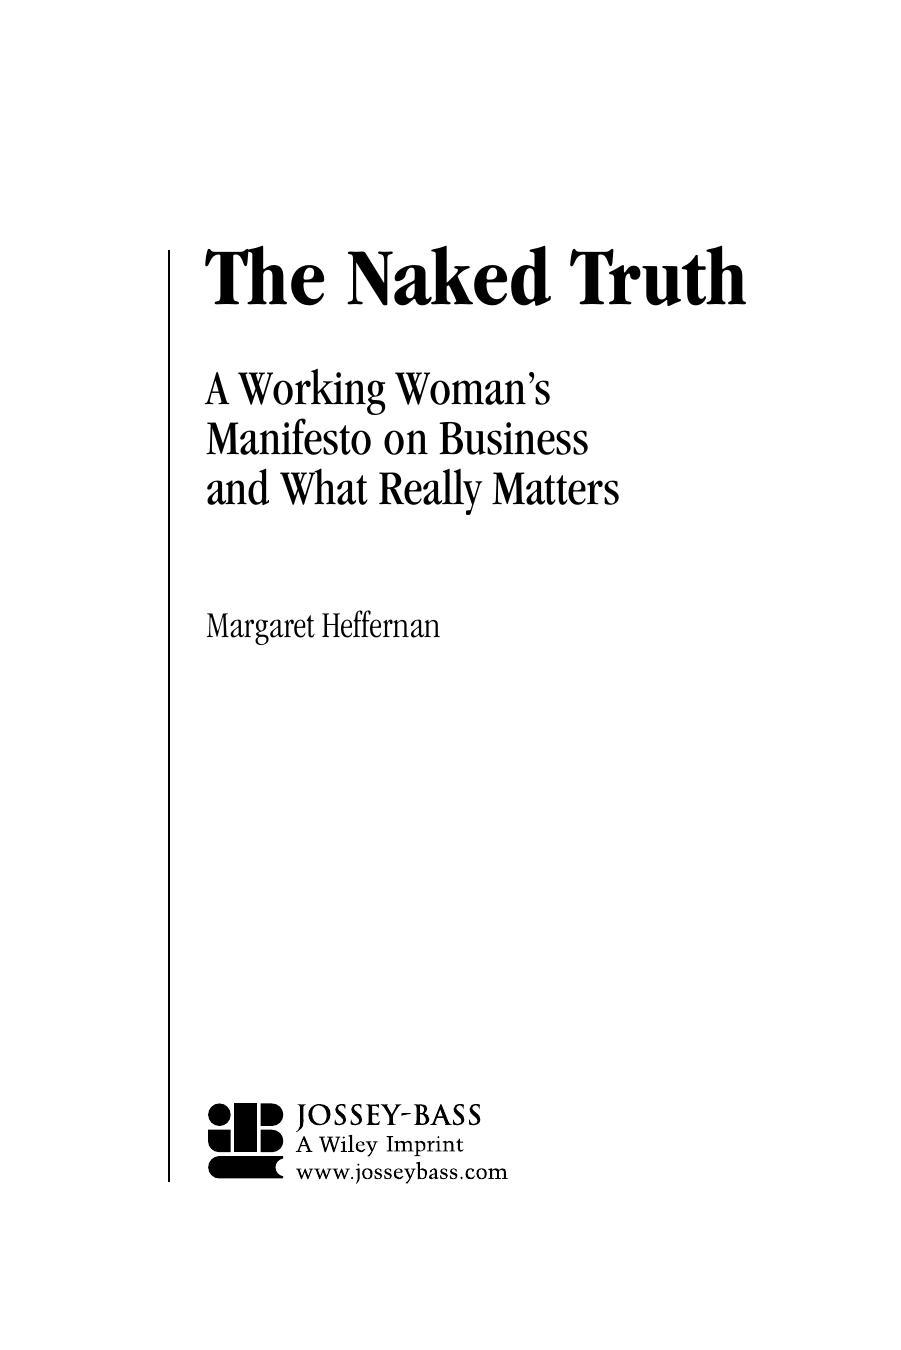 The Naked Truth: A Working Woman's Manifesto on Business and What Really Matters by Margaret A. Heffernan